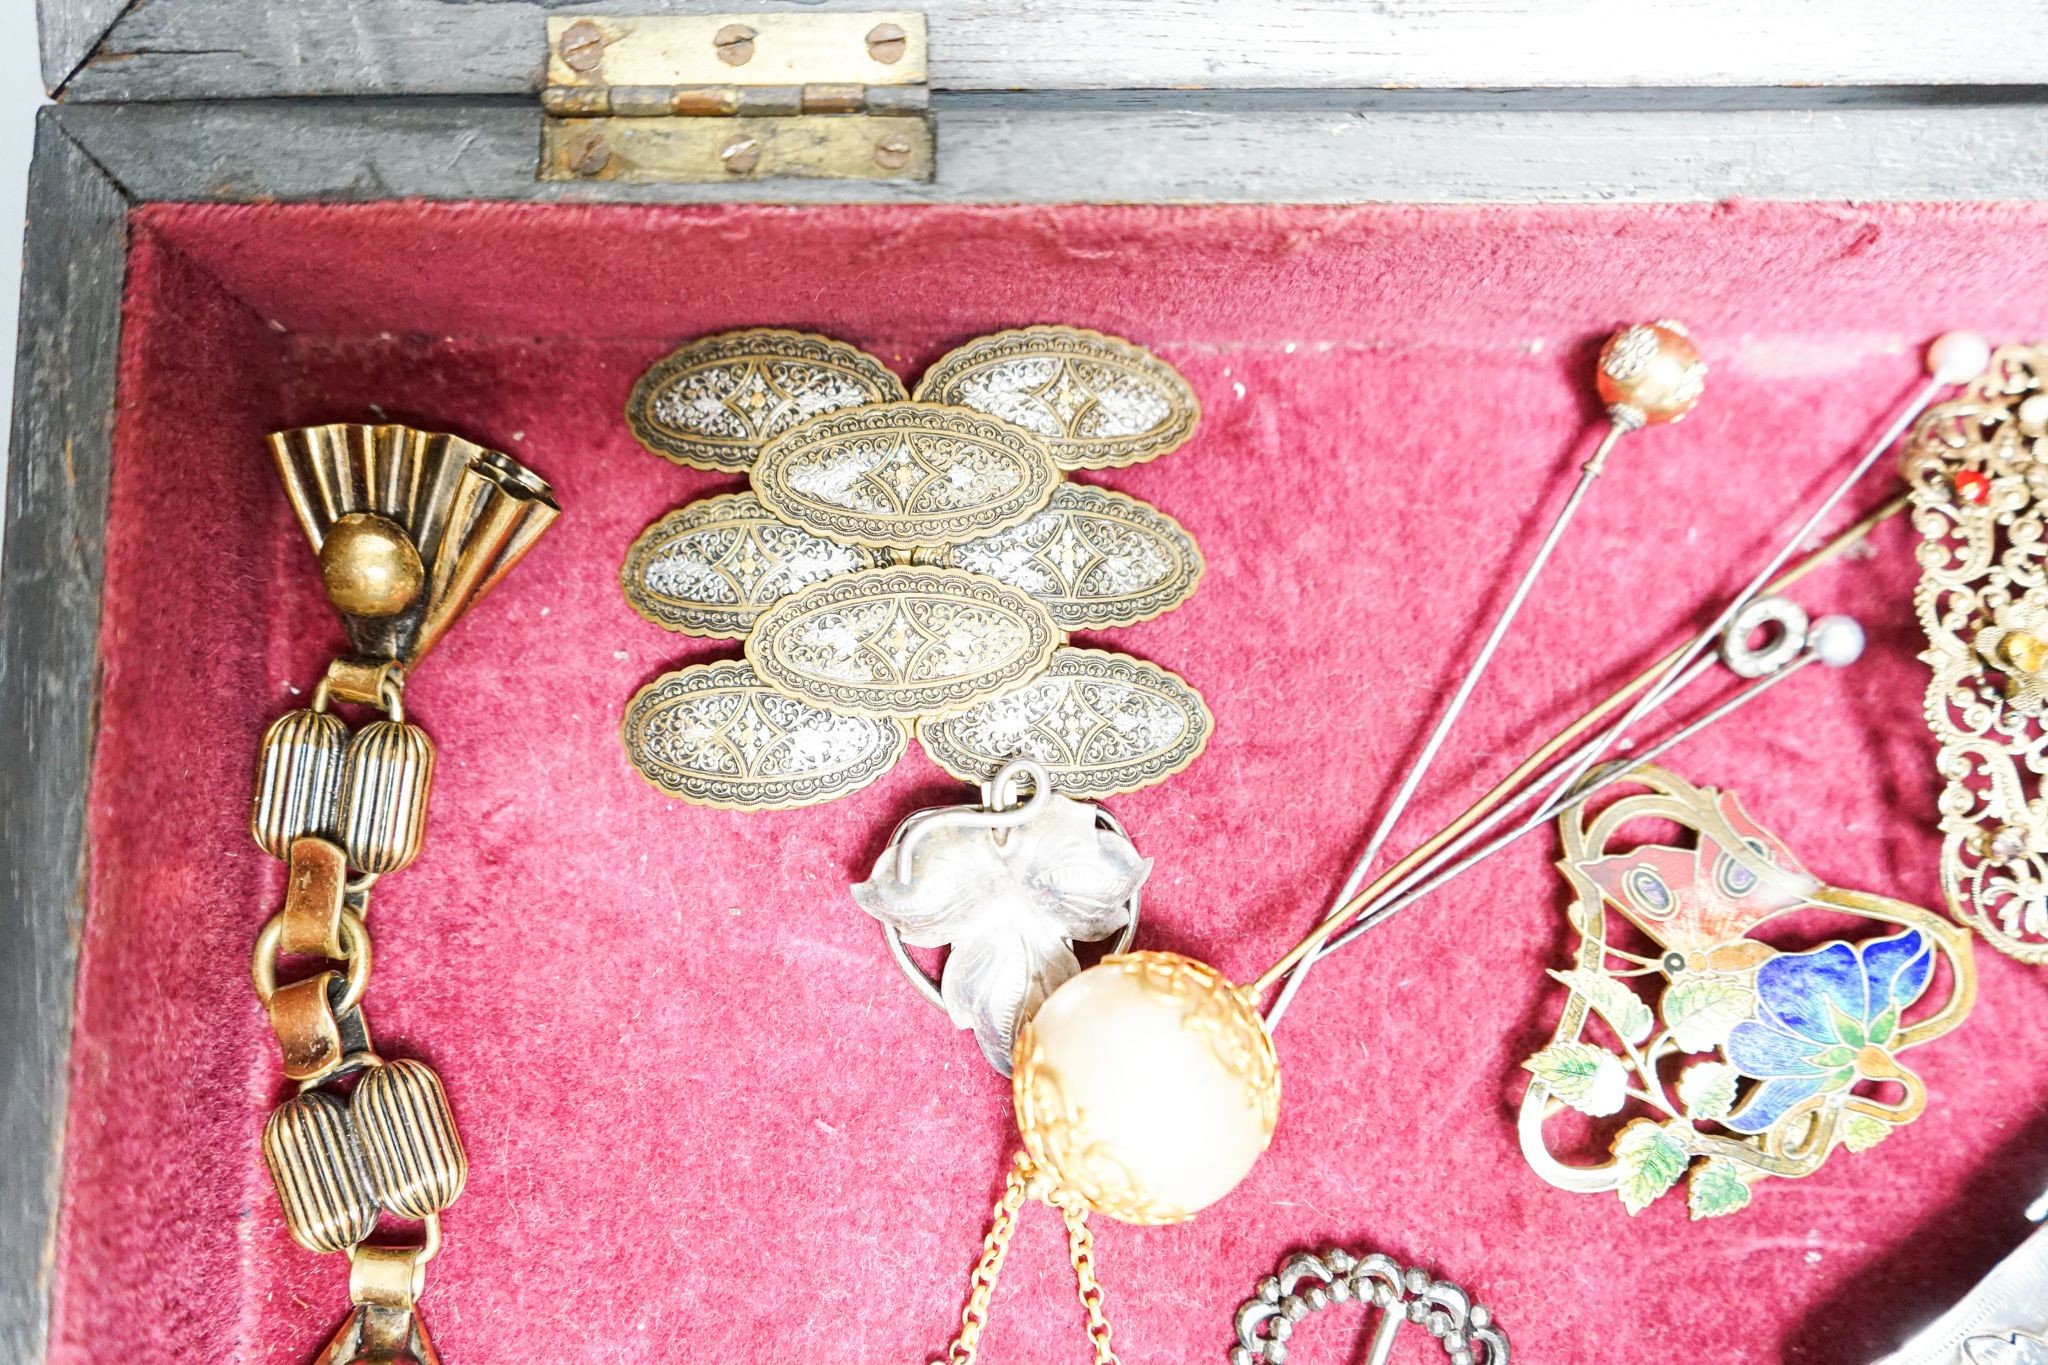 A group of belt buckles, clips and hatpins in a mahogany display case, 30.5cm